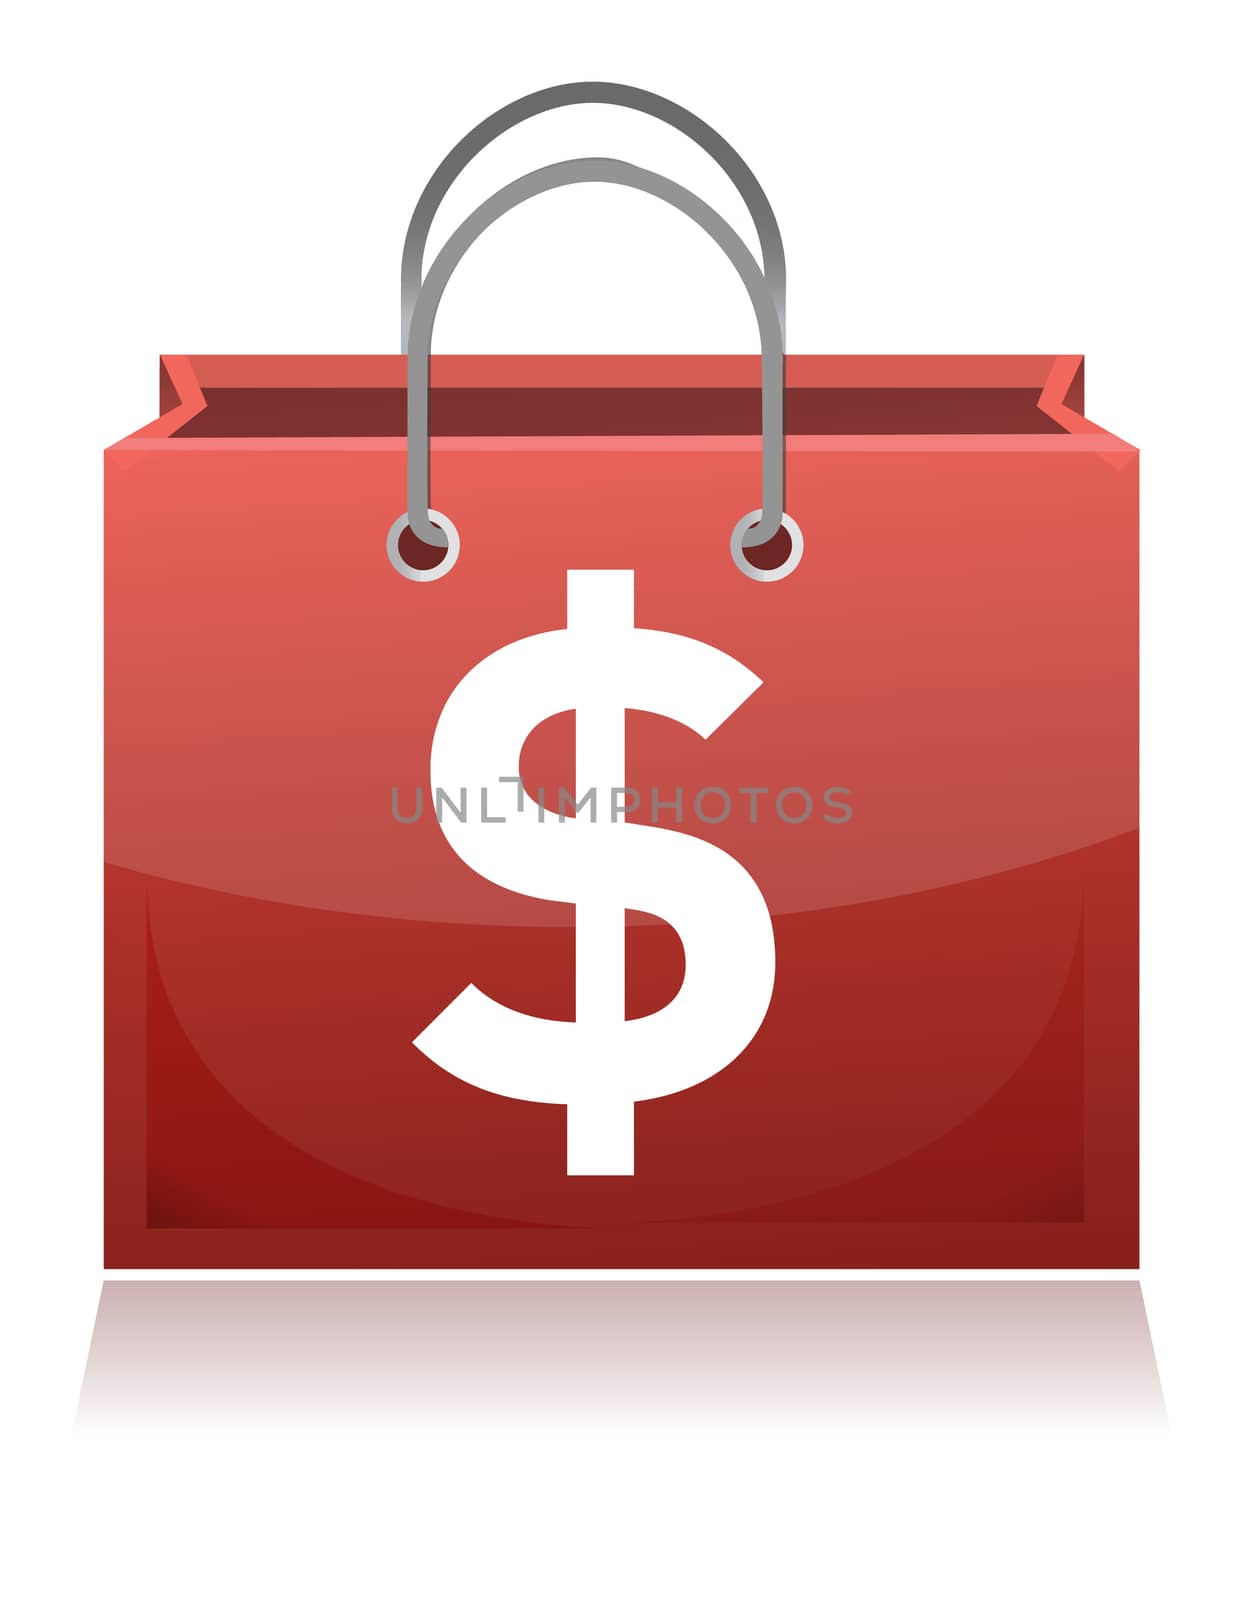 Shopping bag with dollar sign